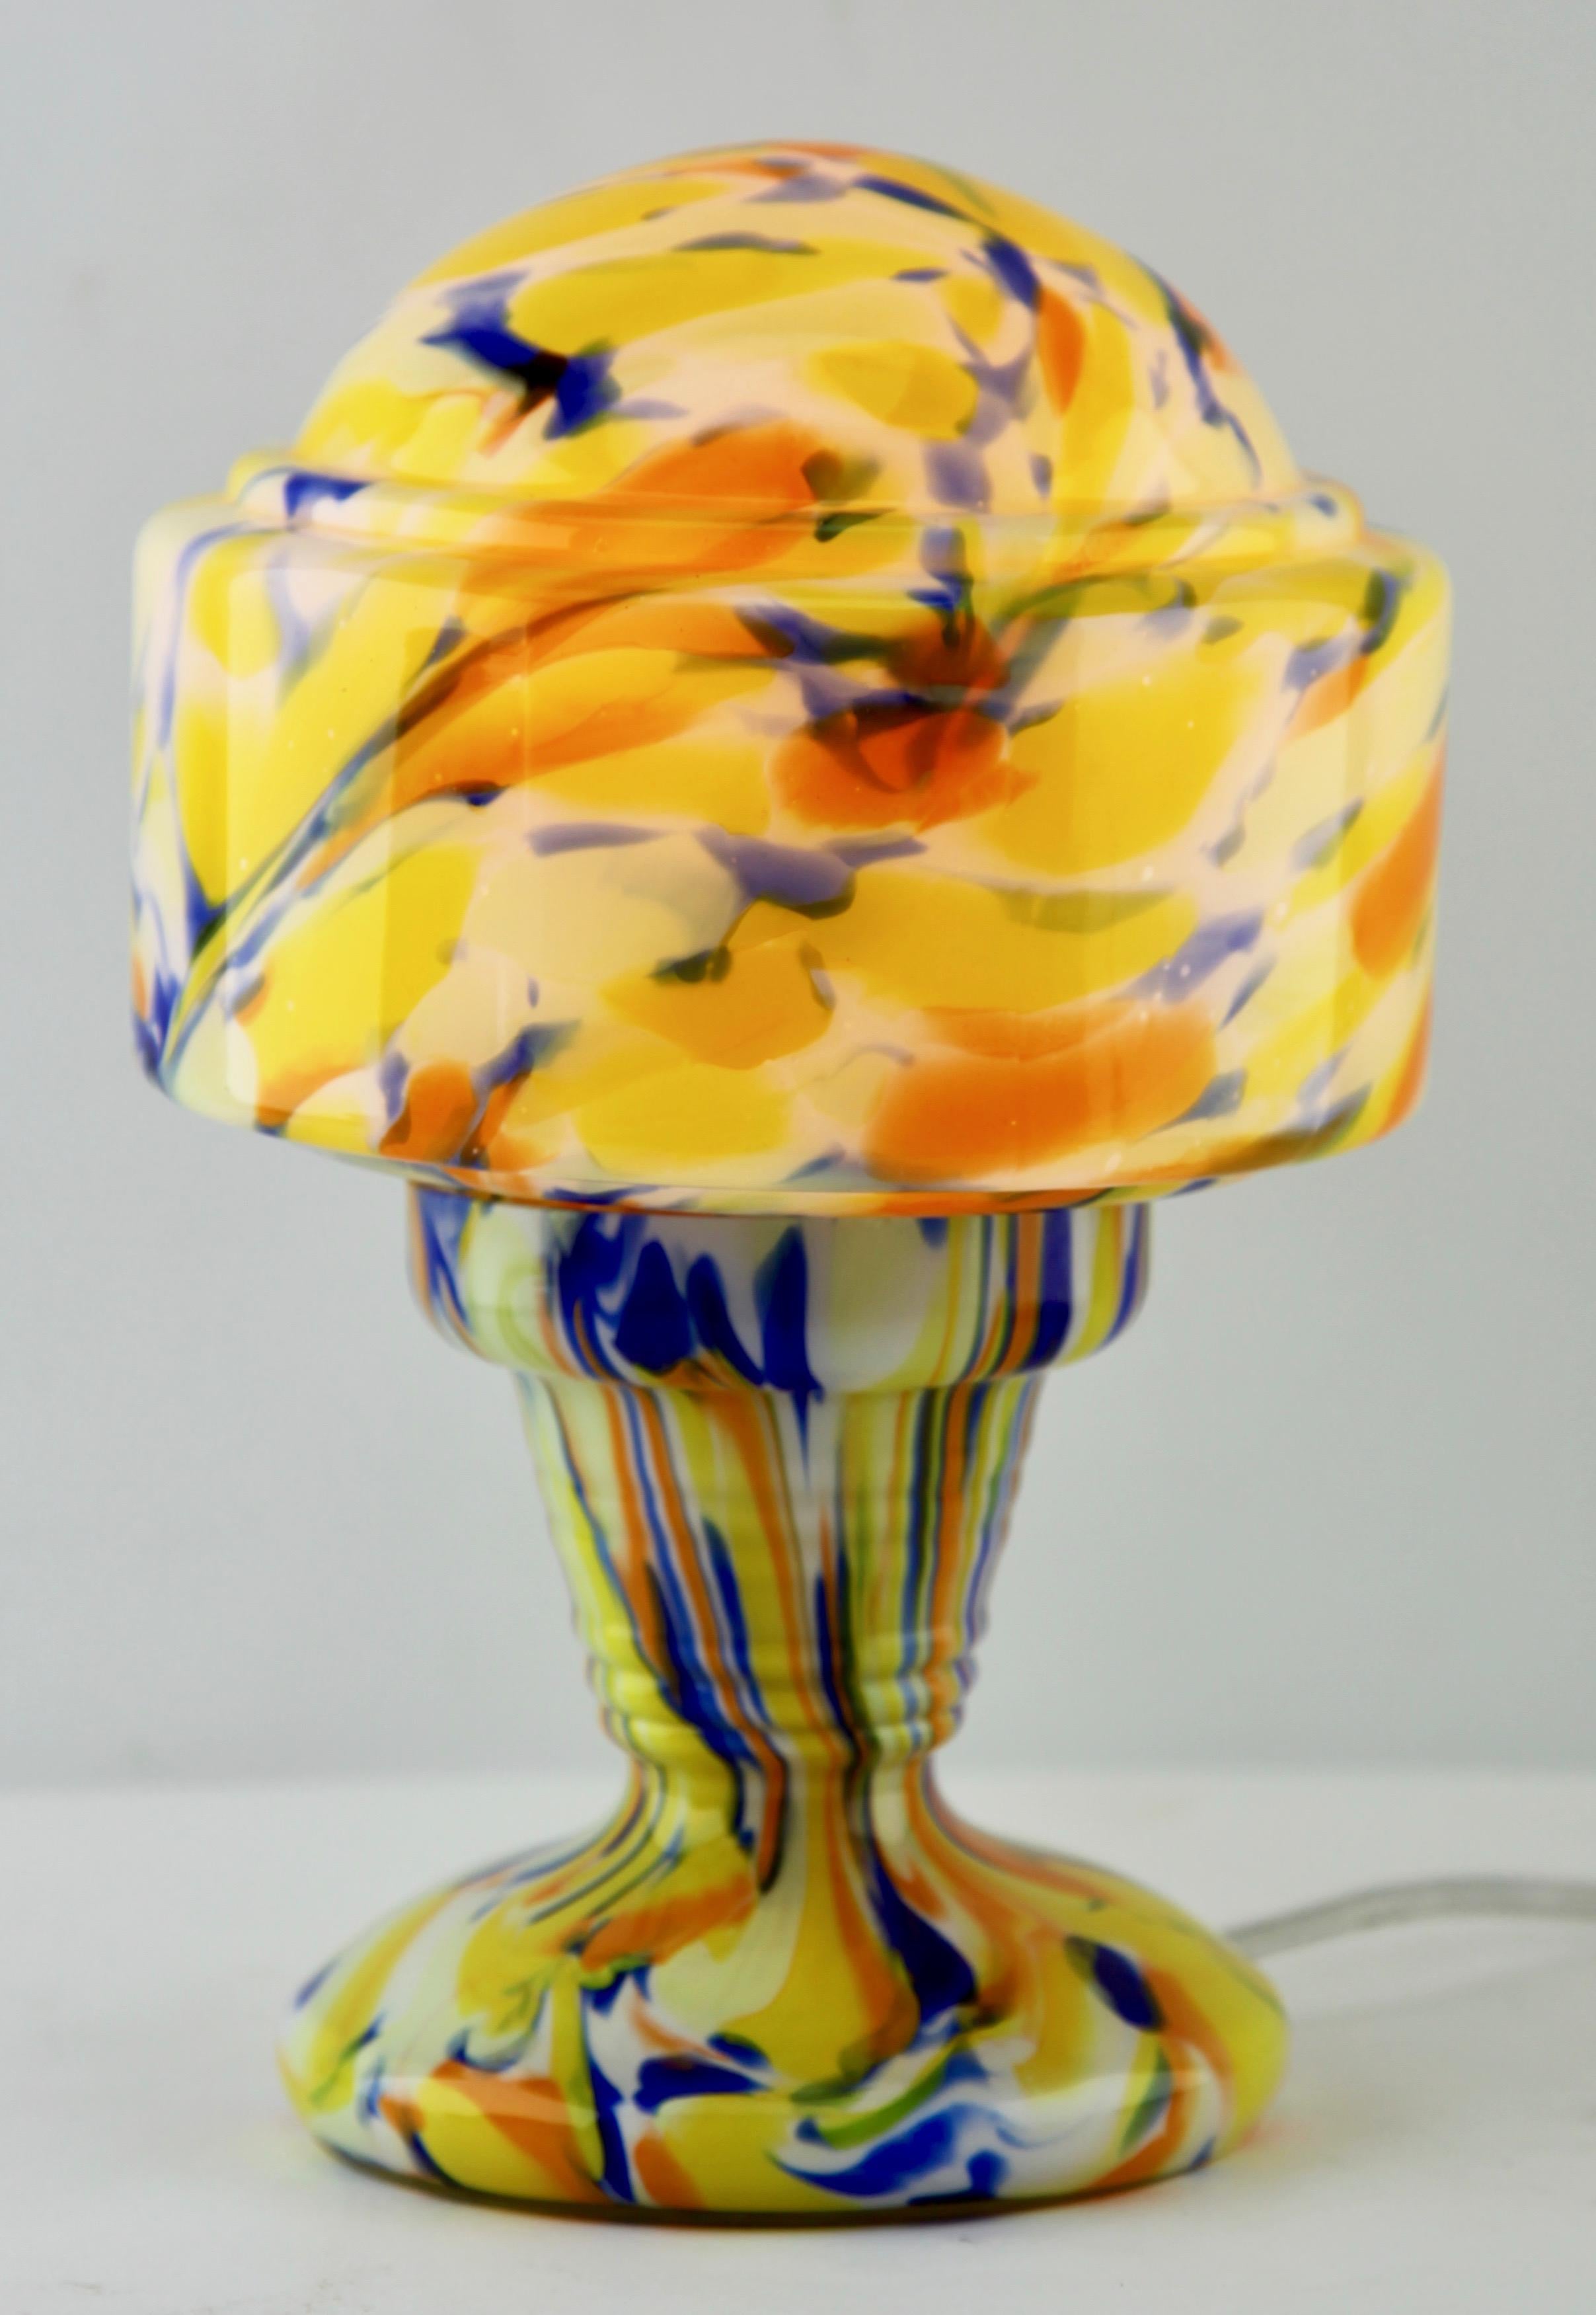 Startling spatter Table Lamp with multicolored colors, in hand blown splatter glass Lamp in the Art Deco style.
This lamp is the Originel one used in de Book See Picture

And safe for usage in the World.  
Originel Fitting E27 New Wiring

A special